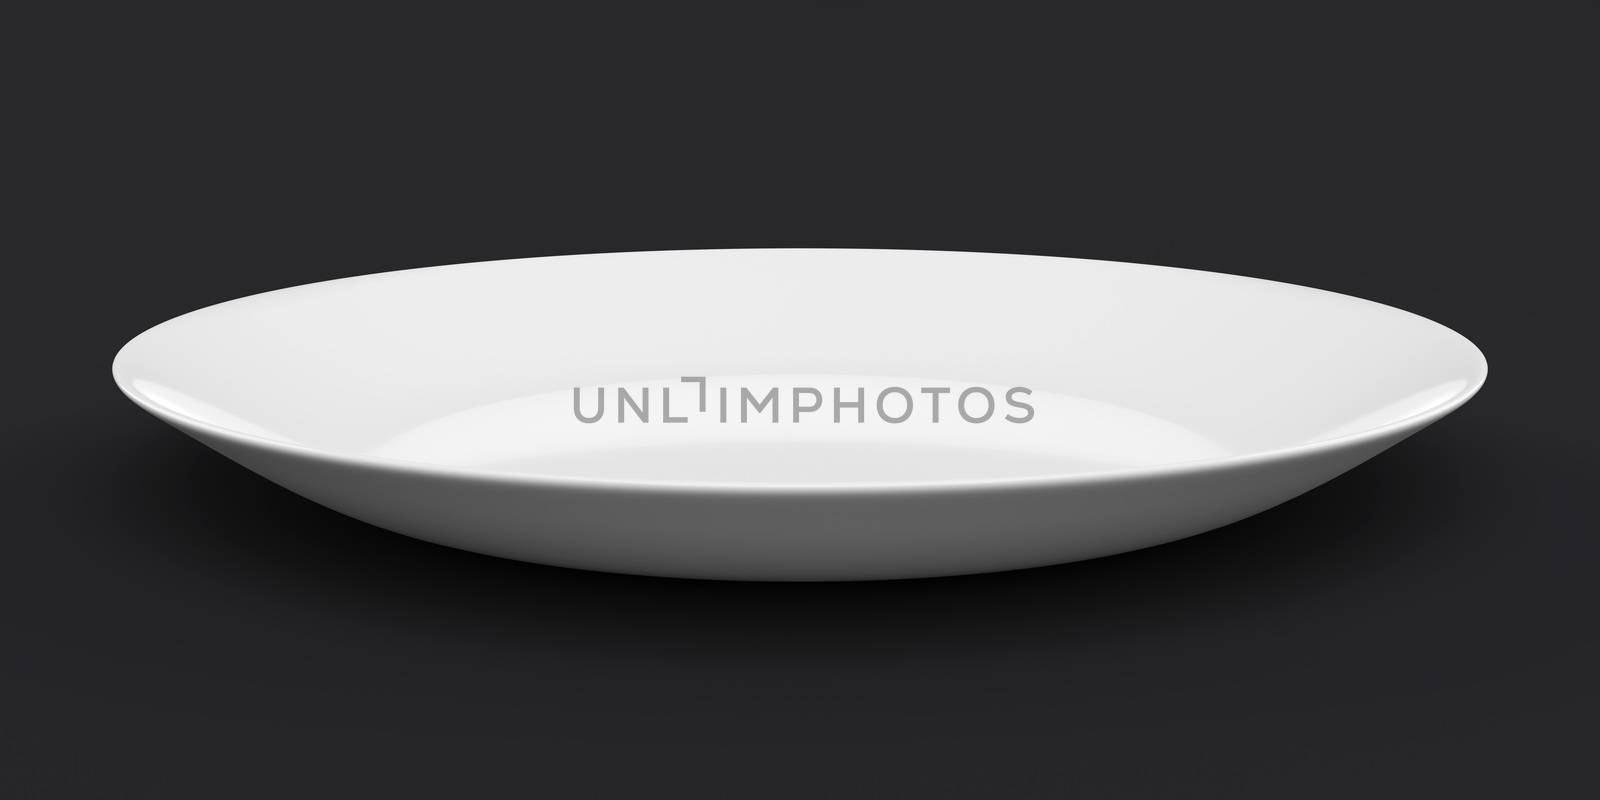 Empty white plate or ceramic dish on black background. 3D rendering with clipping path